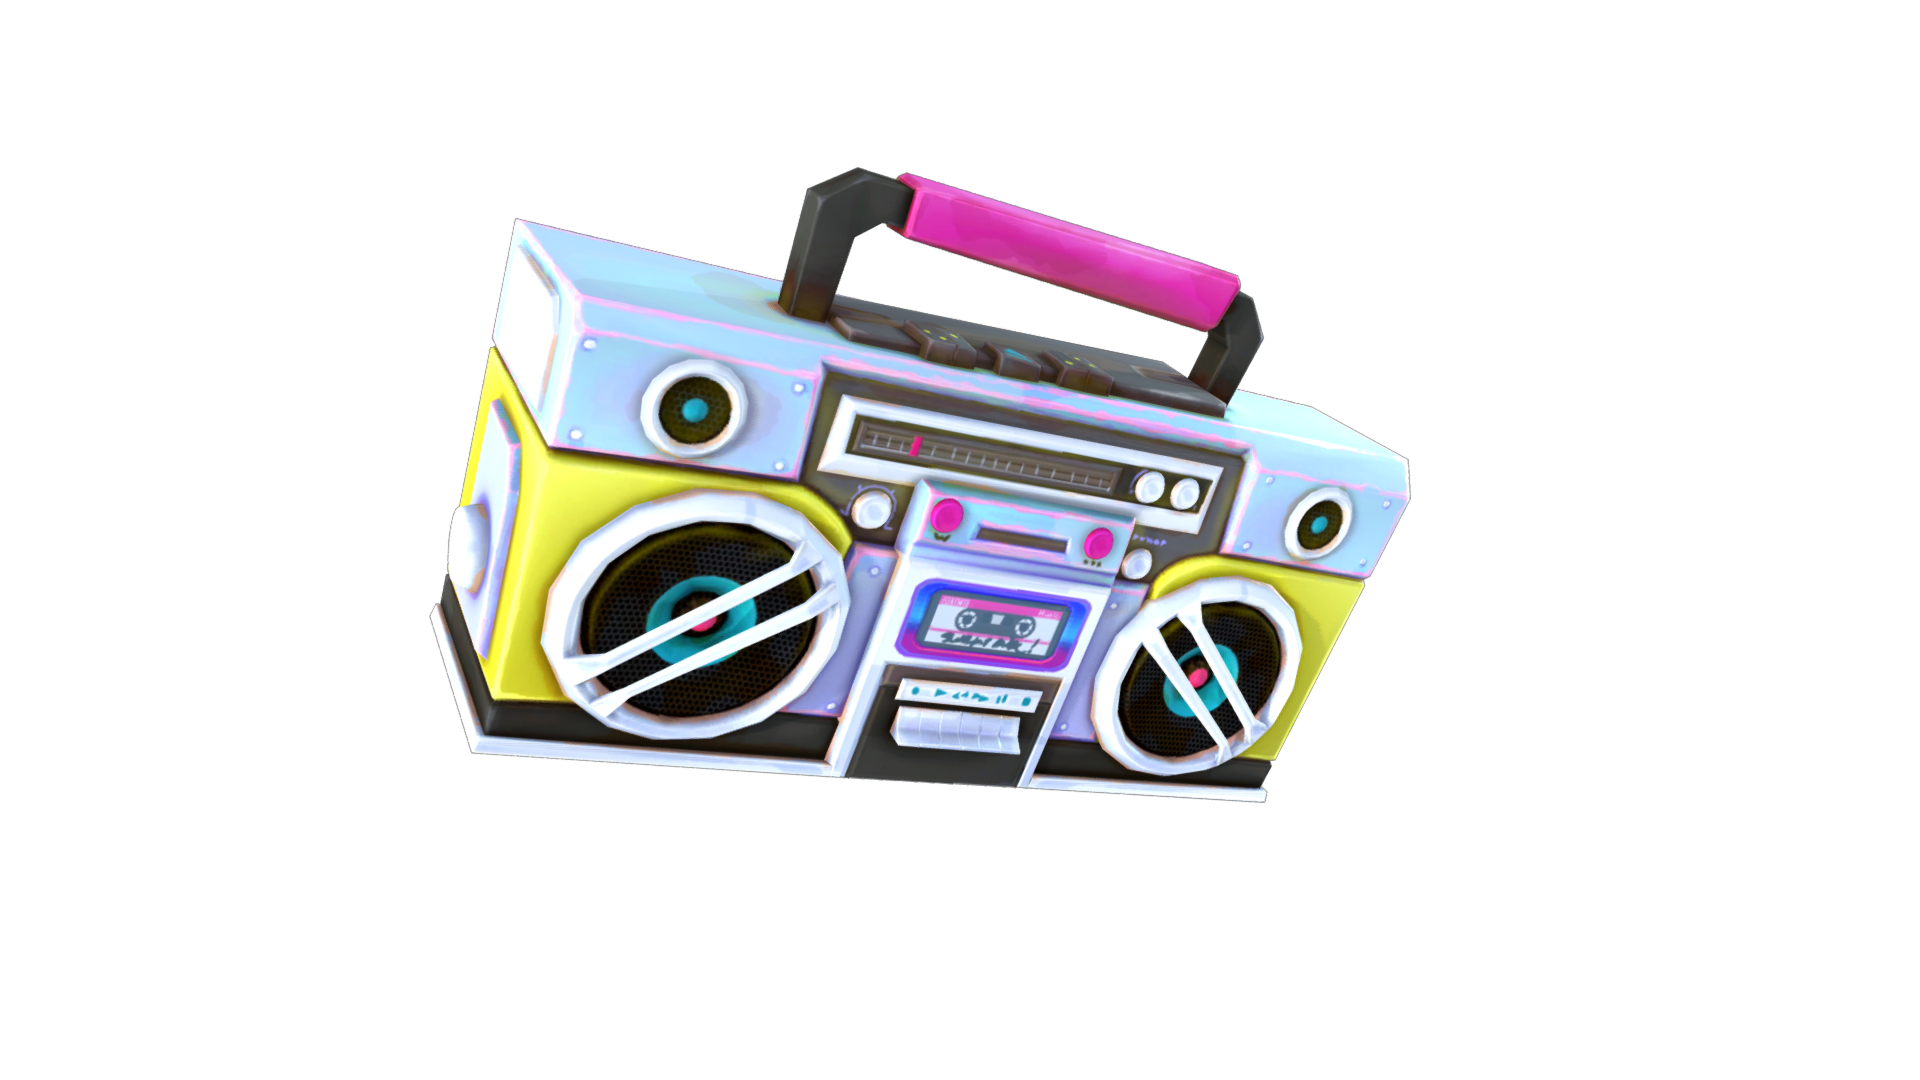 Png Images - Boombox , HD Wallpaper & Backgrounds